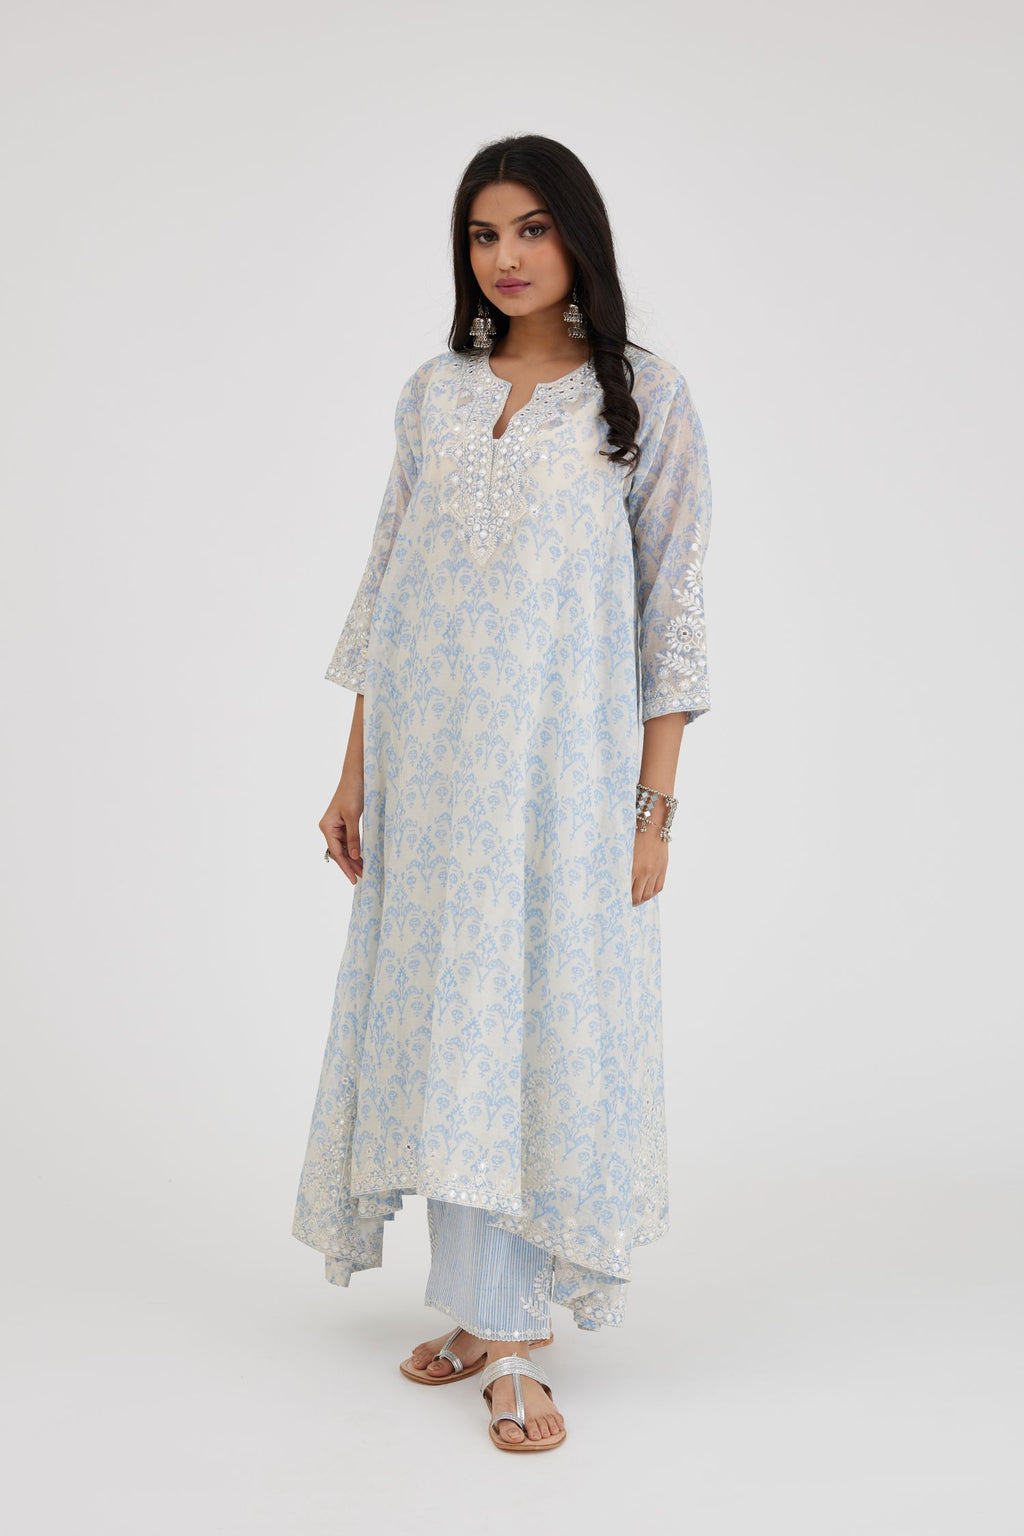 Ikat design blue and off white hand block-printed Cotton Chanderi panelled and asymmetric hem long kurta set with off-white thread and mirror embroidery.